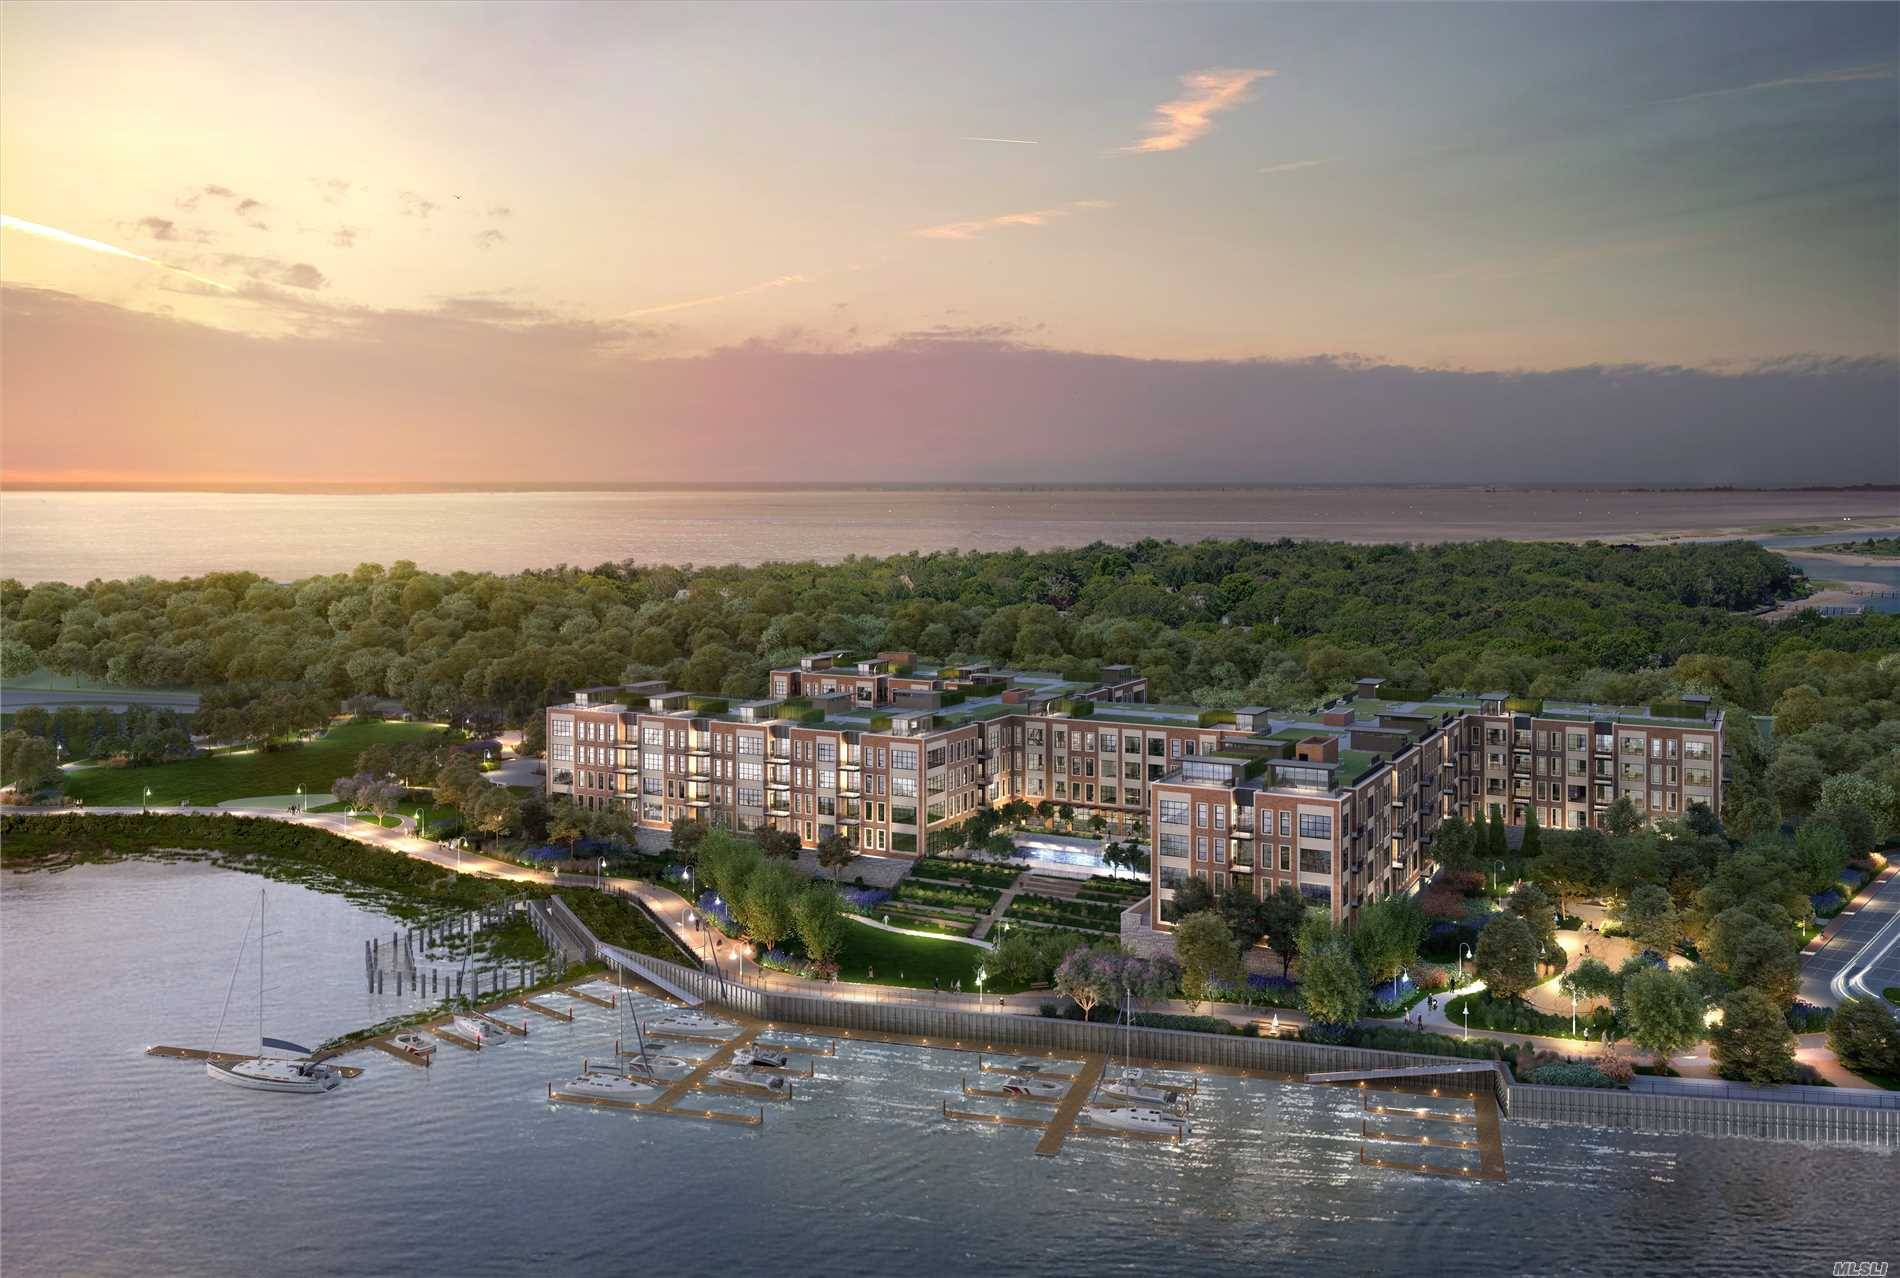 Set On 56 Waterfront Acres, Garvies Point Is The North Shore's Most Dynamic New Community.